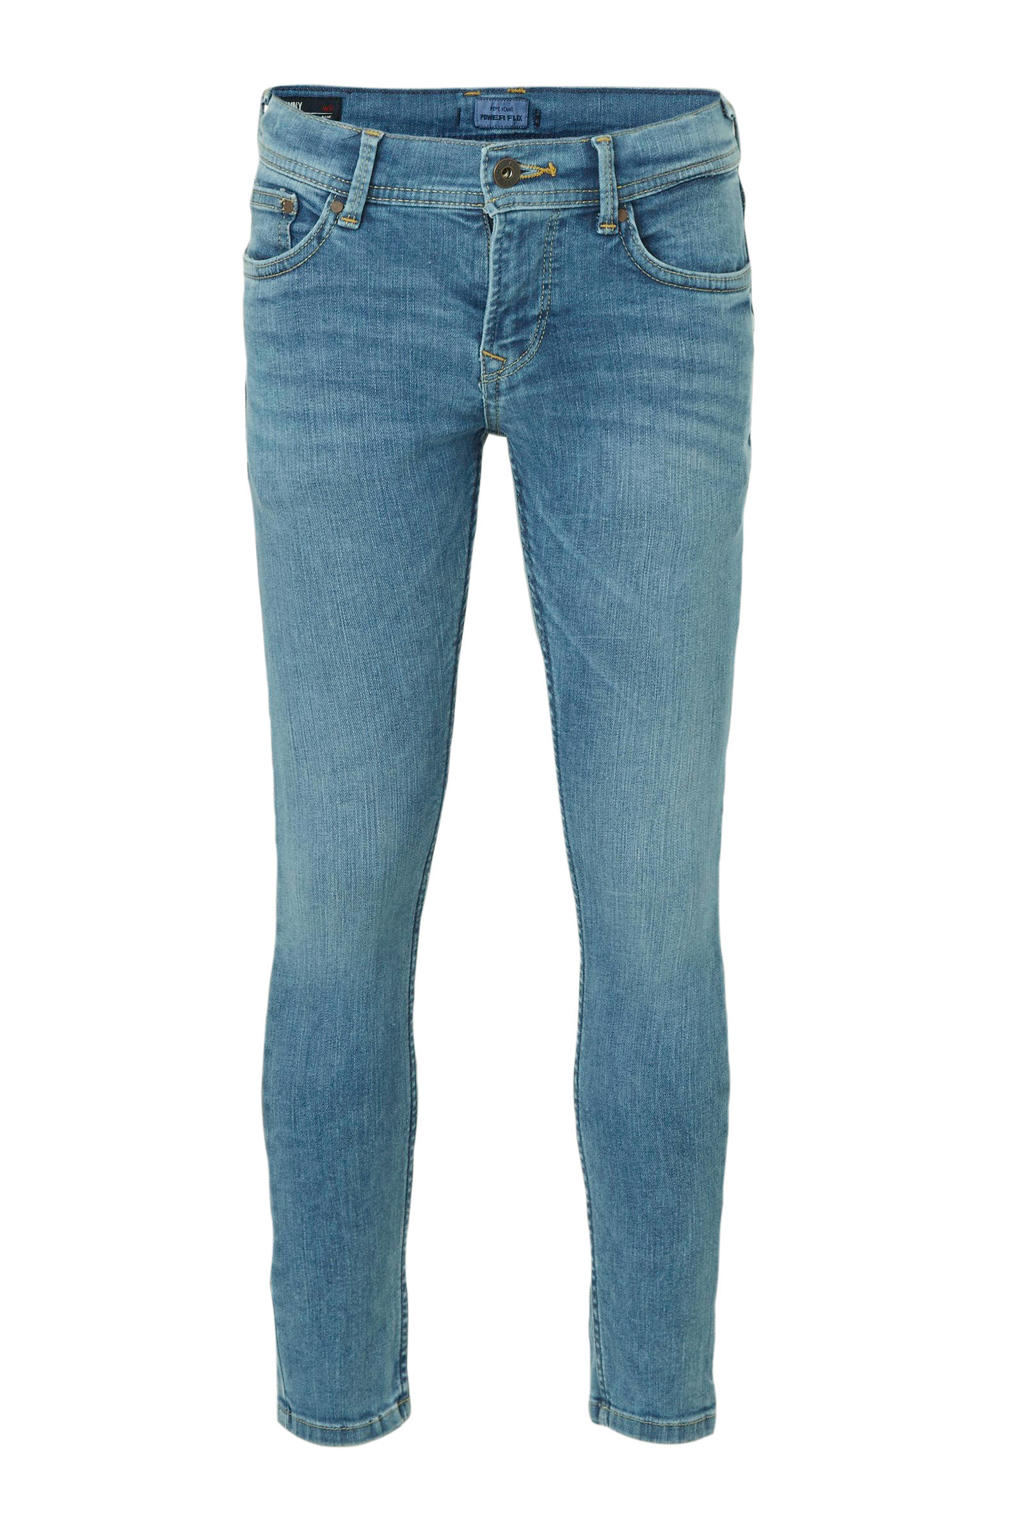 Pepe Jeans skinny jeans Finly blauw